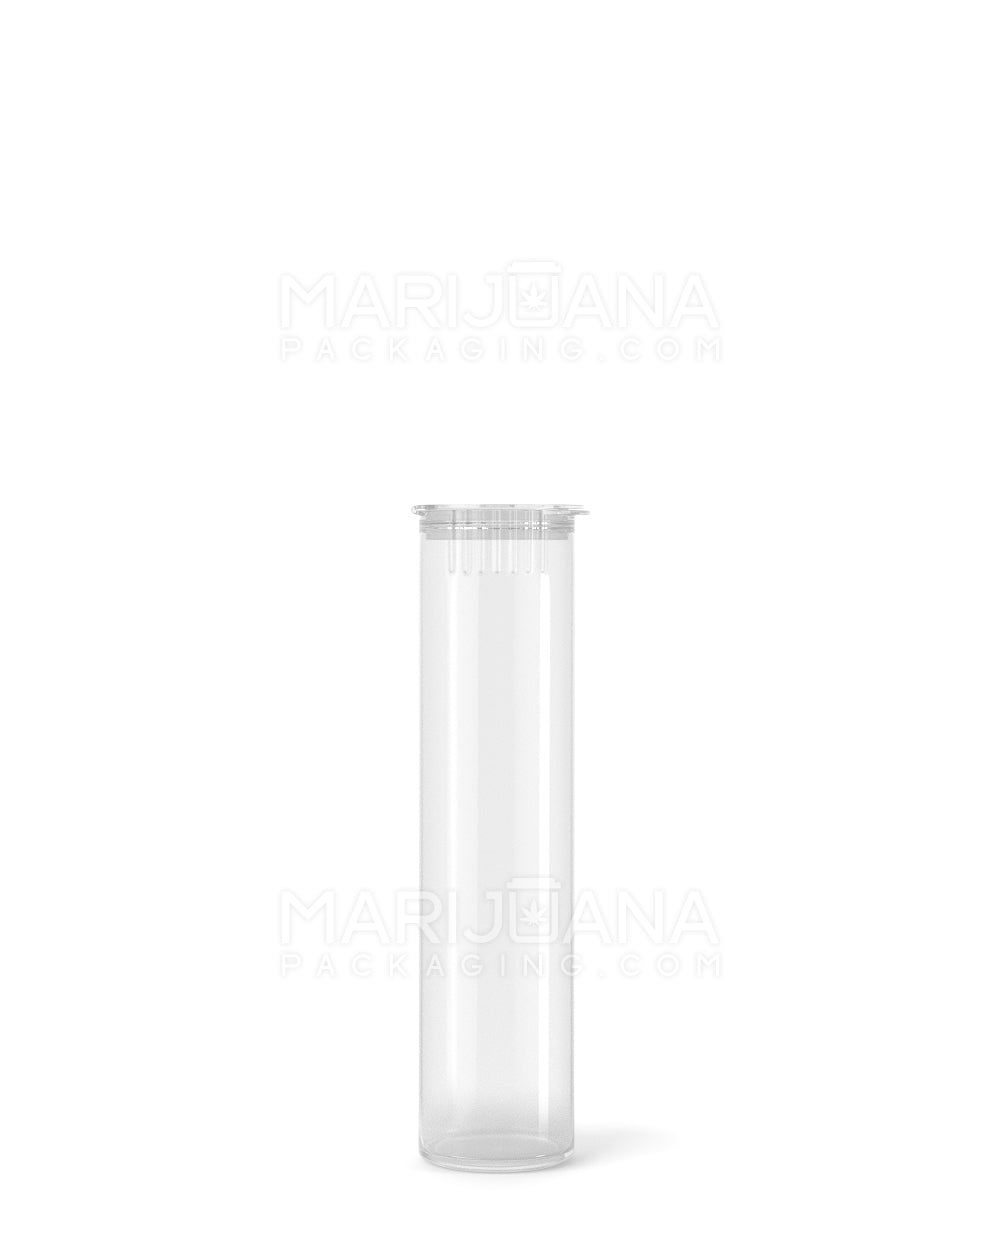 Child Resistant | Pop Top Plastic Pre-Roll Tubes | 78mm - Clear - 1200 Count - 2